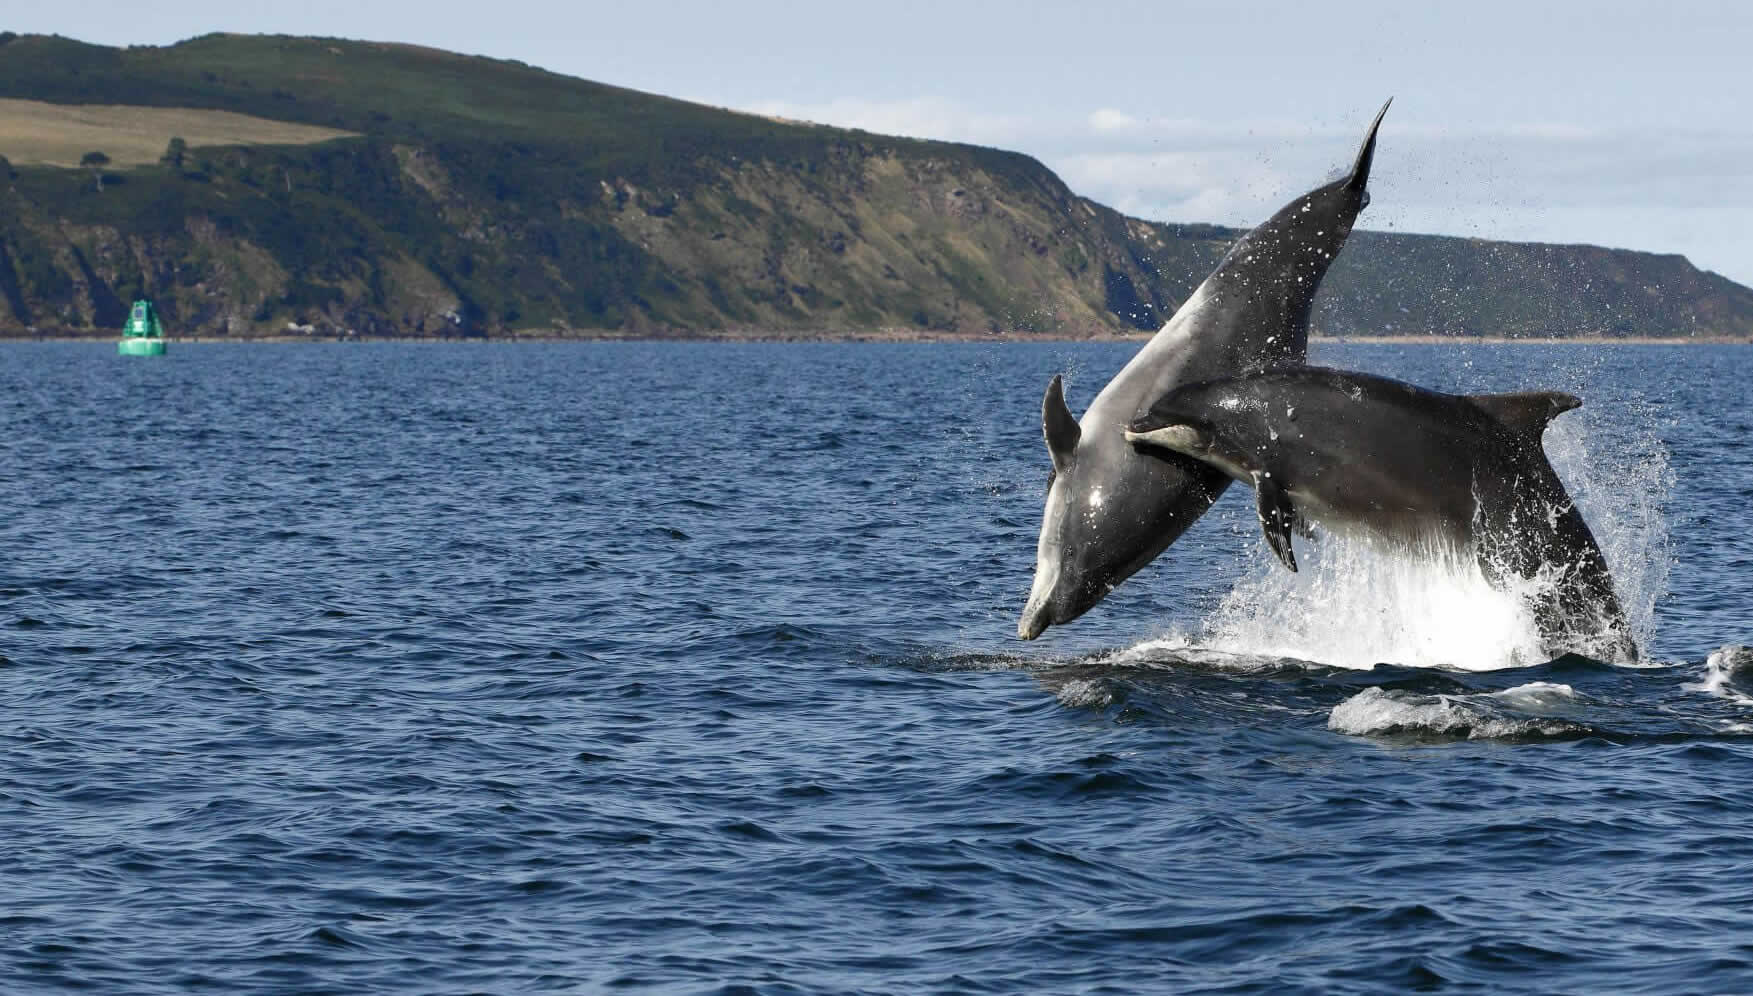 Creepy Facts About Dolphins: Unveiling the Dark Side of the Ocean’s Friendliest Creatures